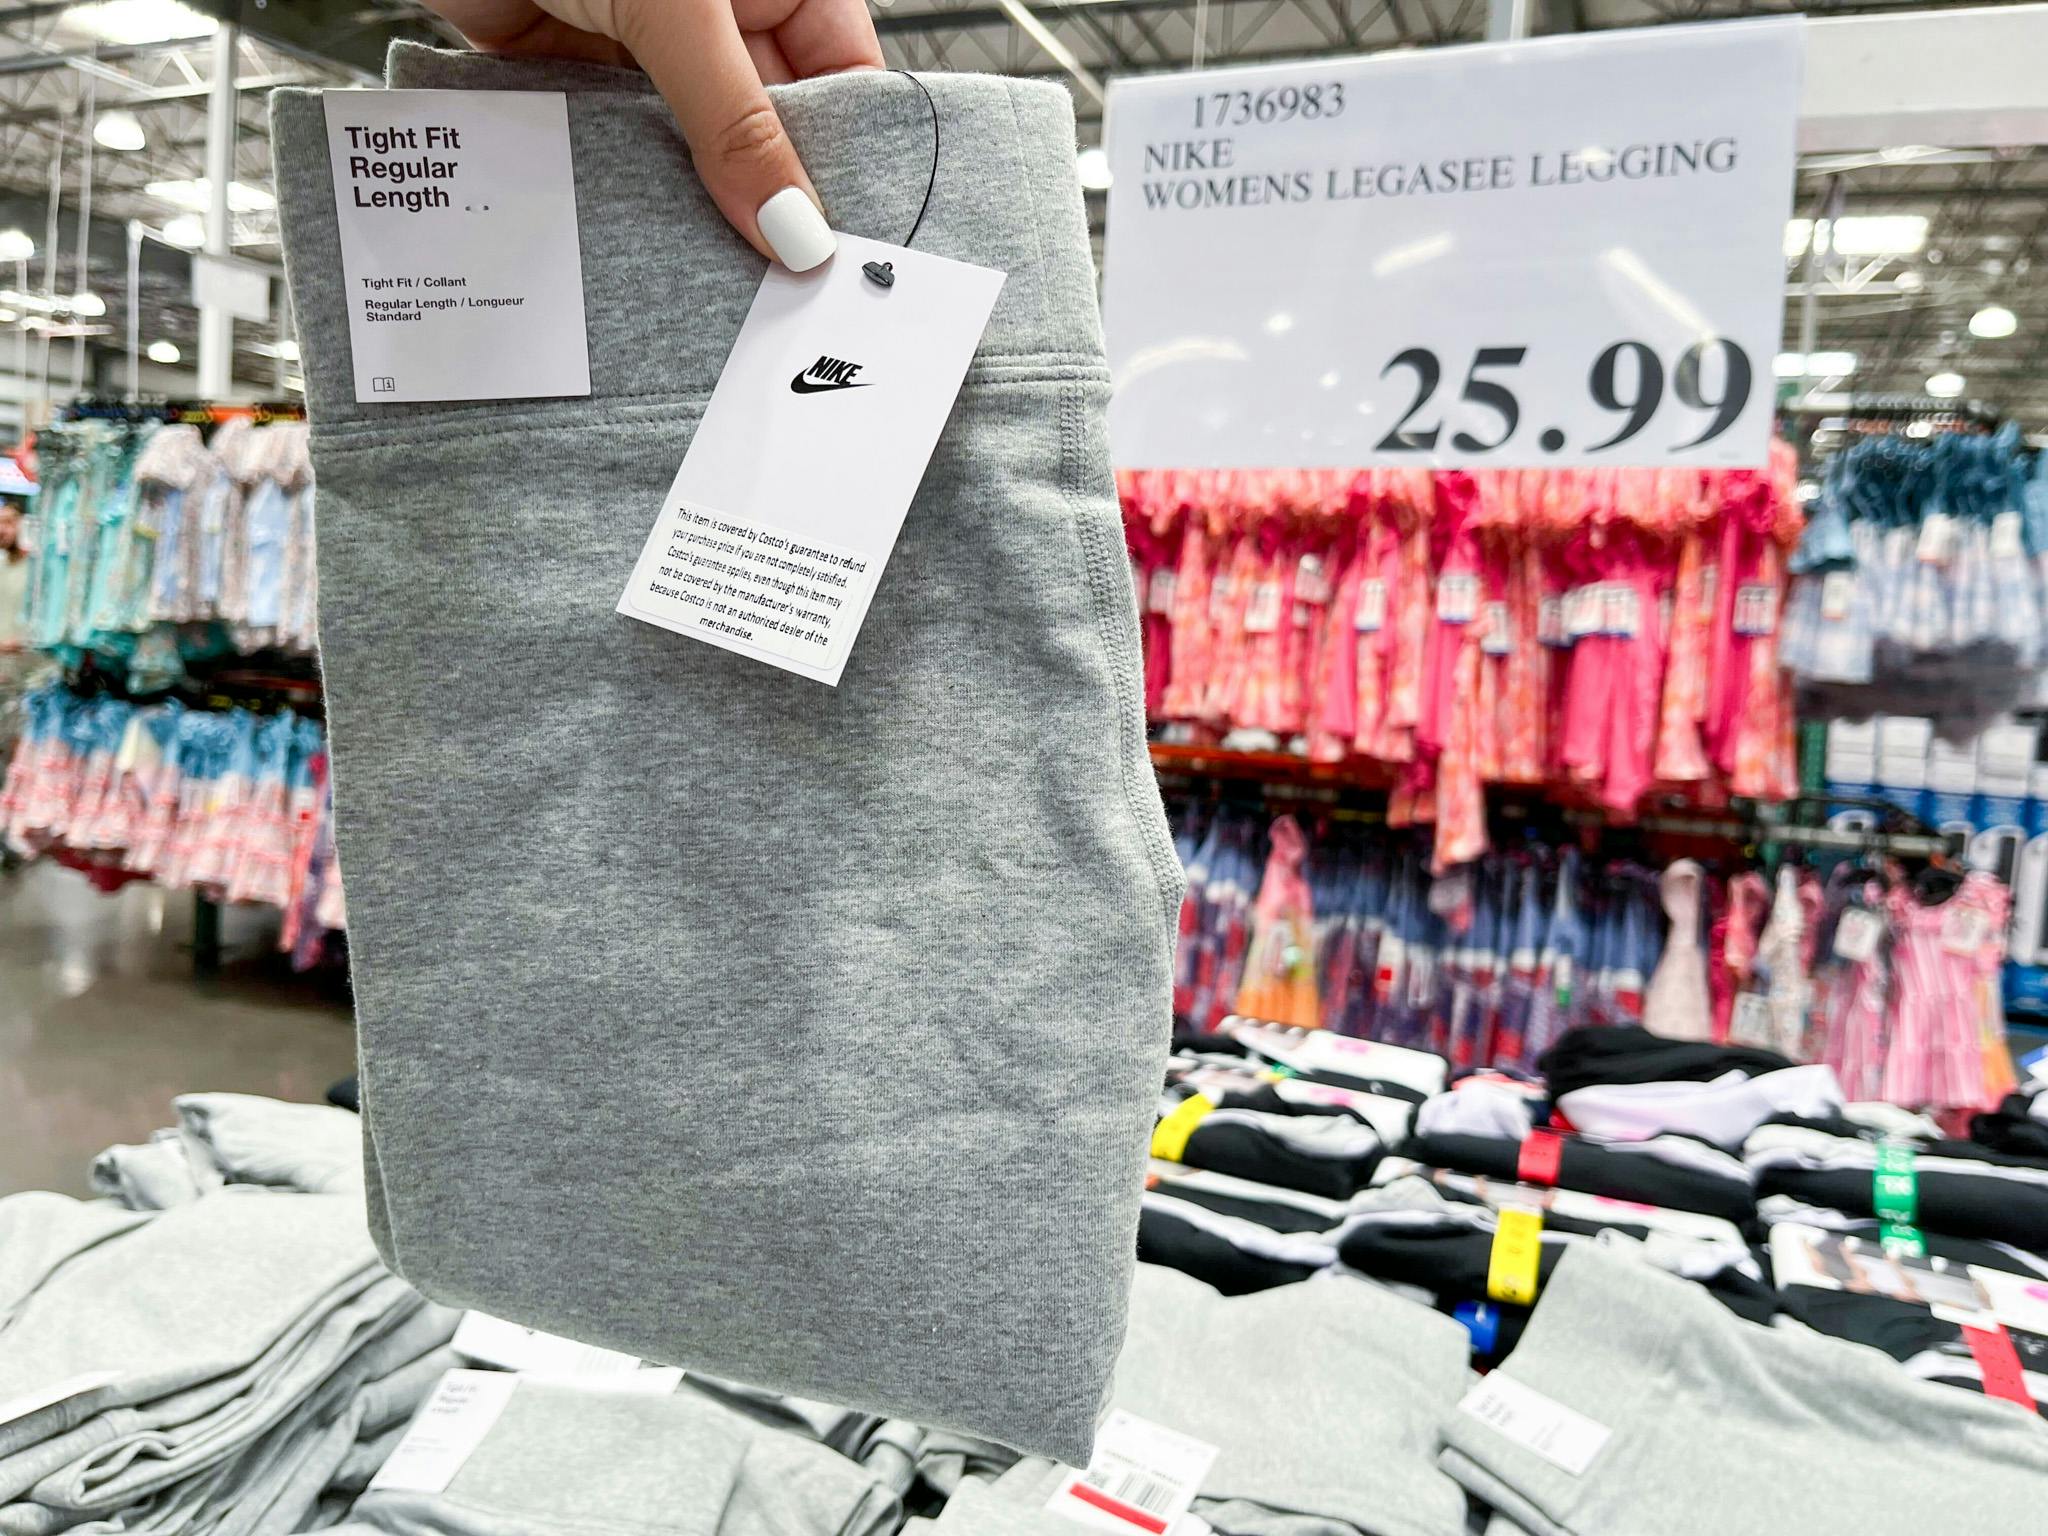 warmte Is Om te mediteren New Nike Leggings at Costco, Just $25.99 - The Krazy Coupon Lady